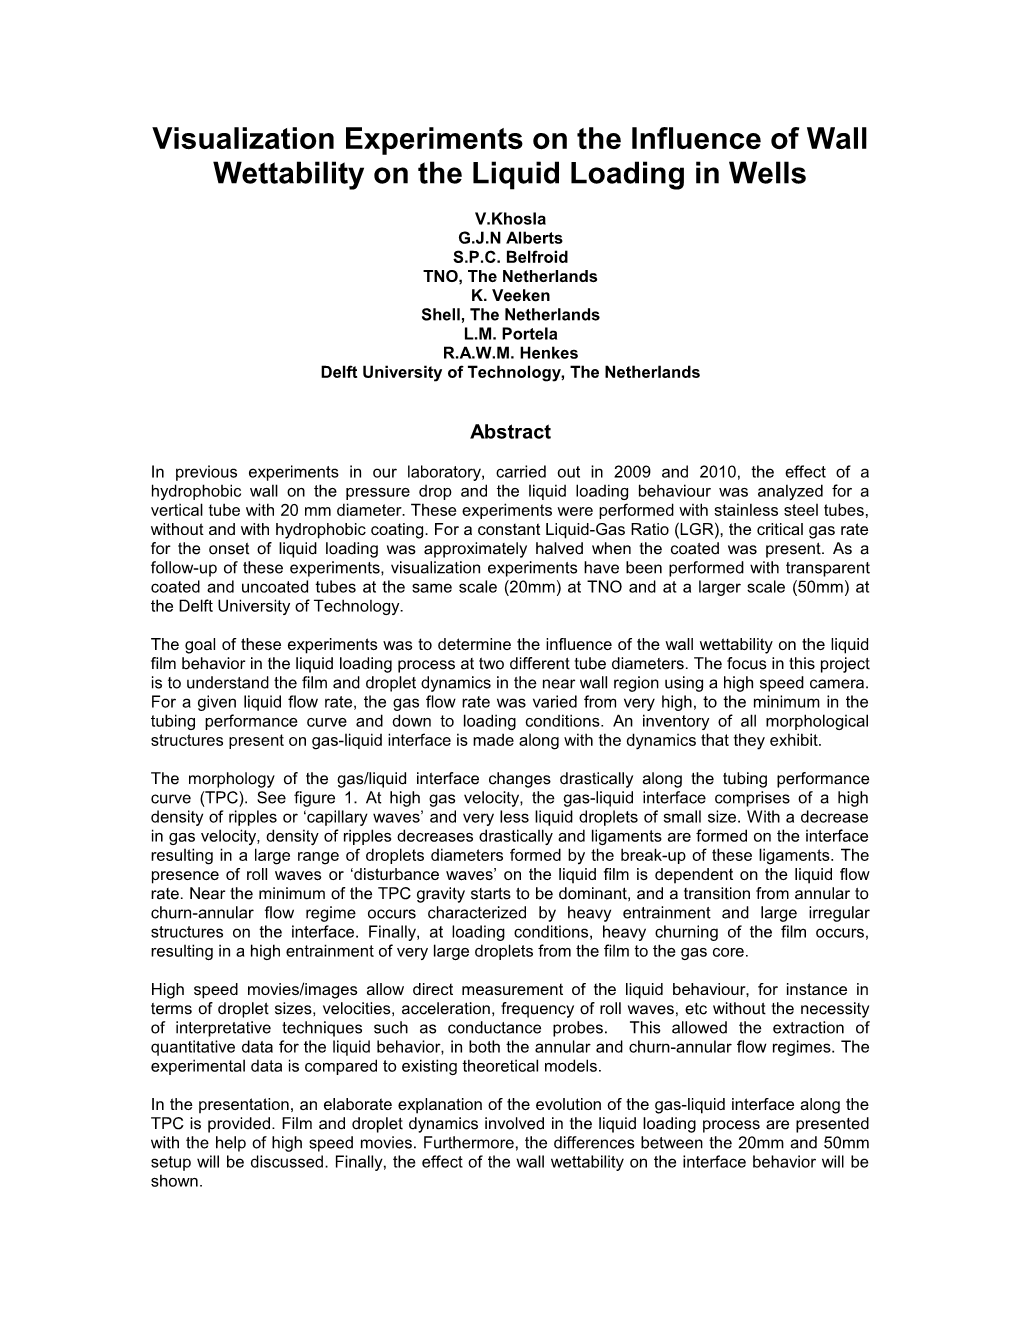 Visualization Experiments on the Influence of Wall Wettability on the Liquid Loading in Wells